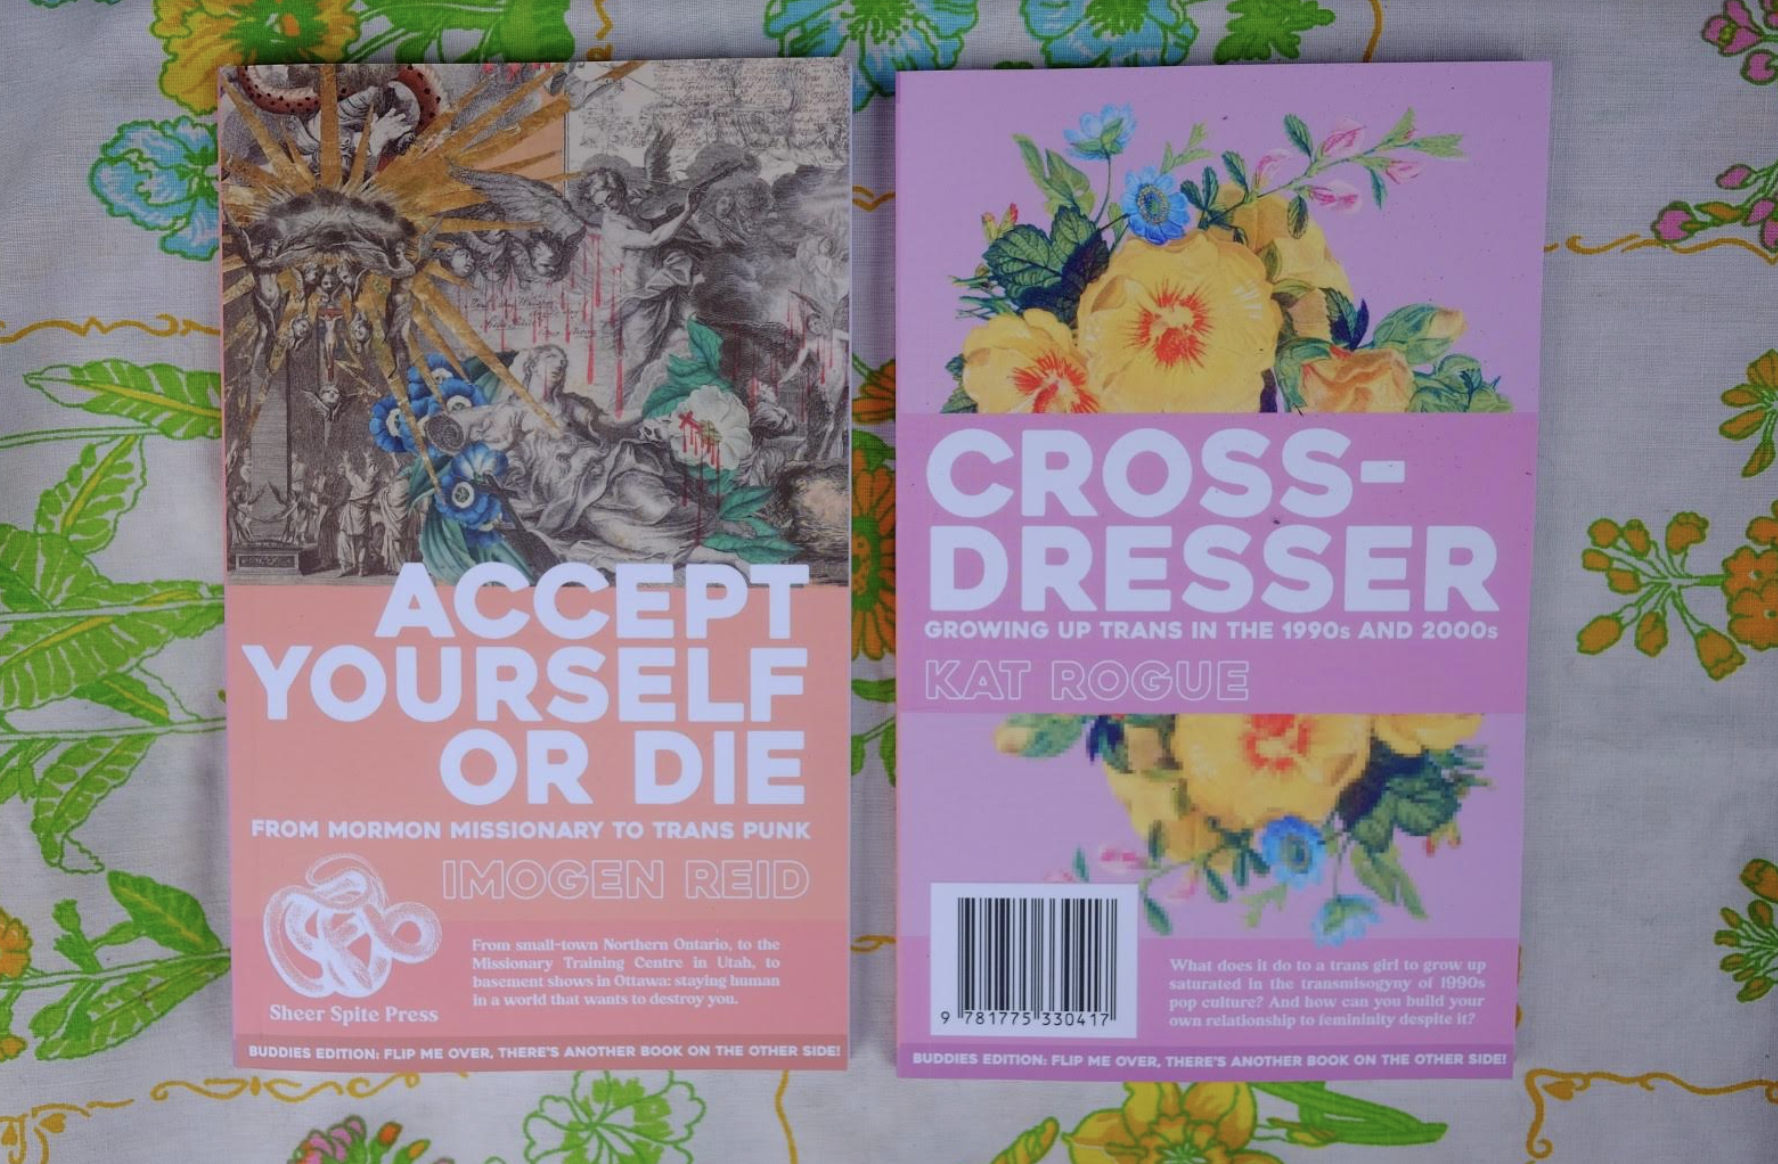 Accept Yourself or Die has a cover image that is a collage of religious imagery and drops of blood. Crossdresser's cover image is a bouquet of flowers, half of which is pixellated.